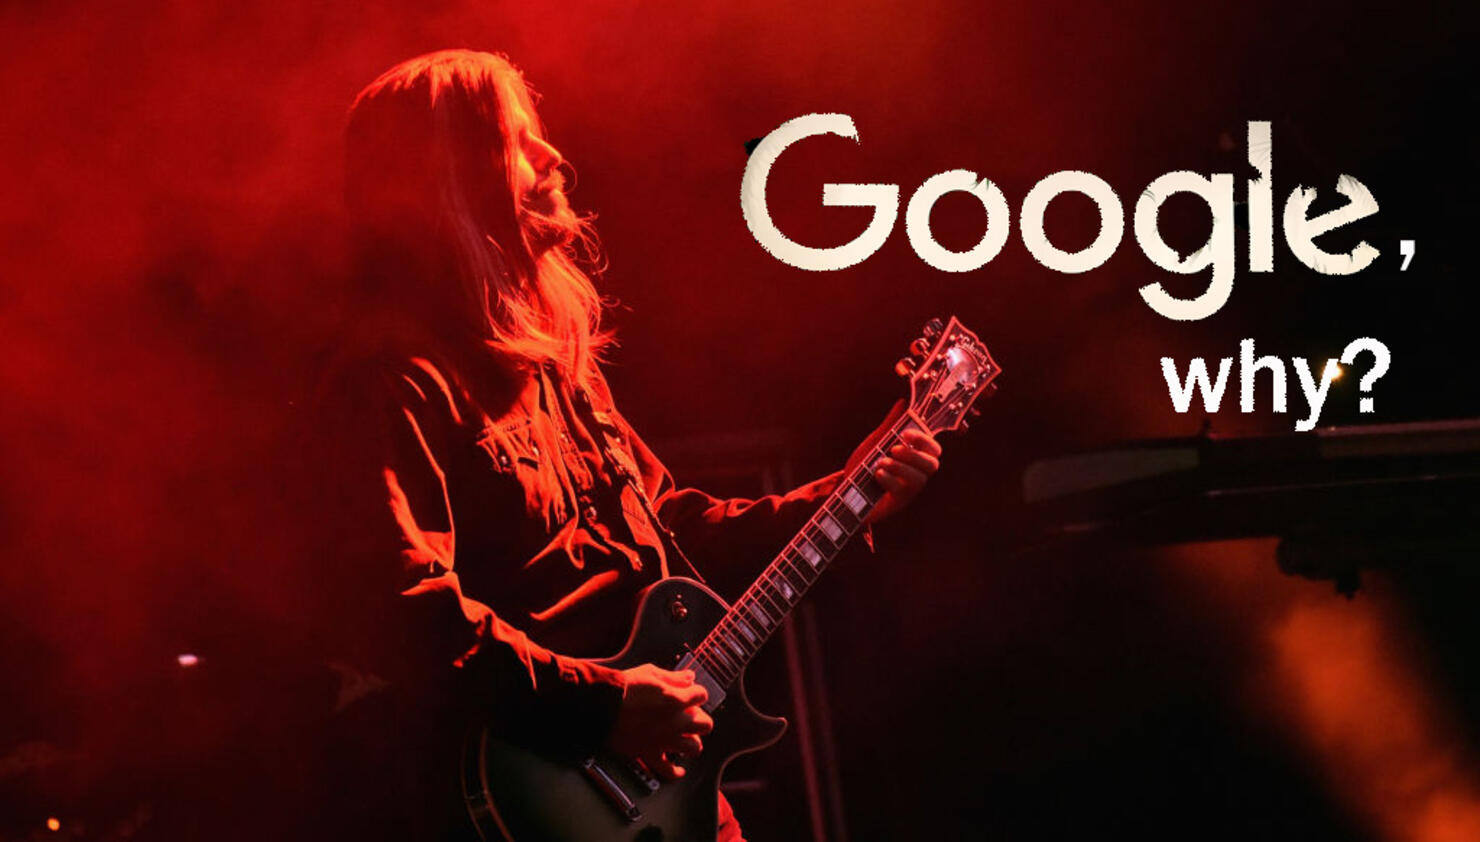 Google Accidentally Reported That Tool's New Album Came Out Today